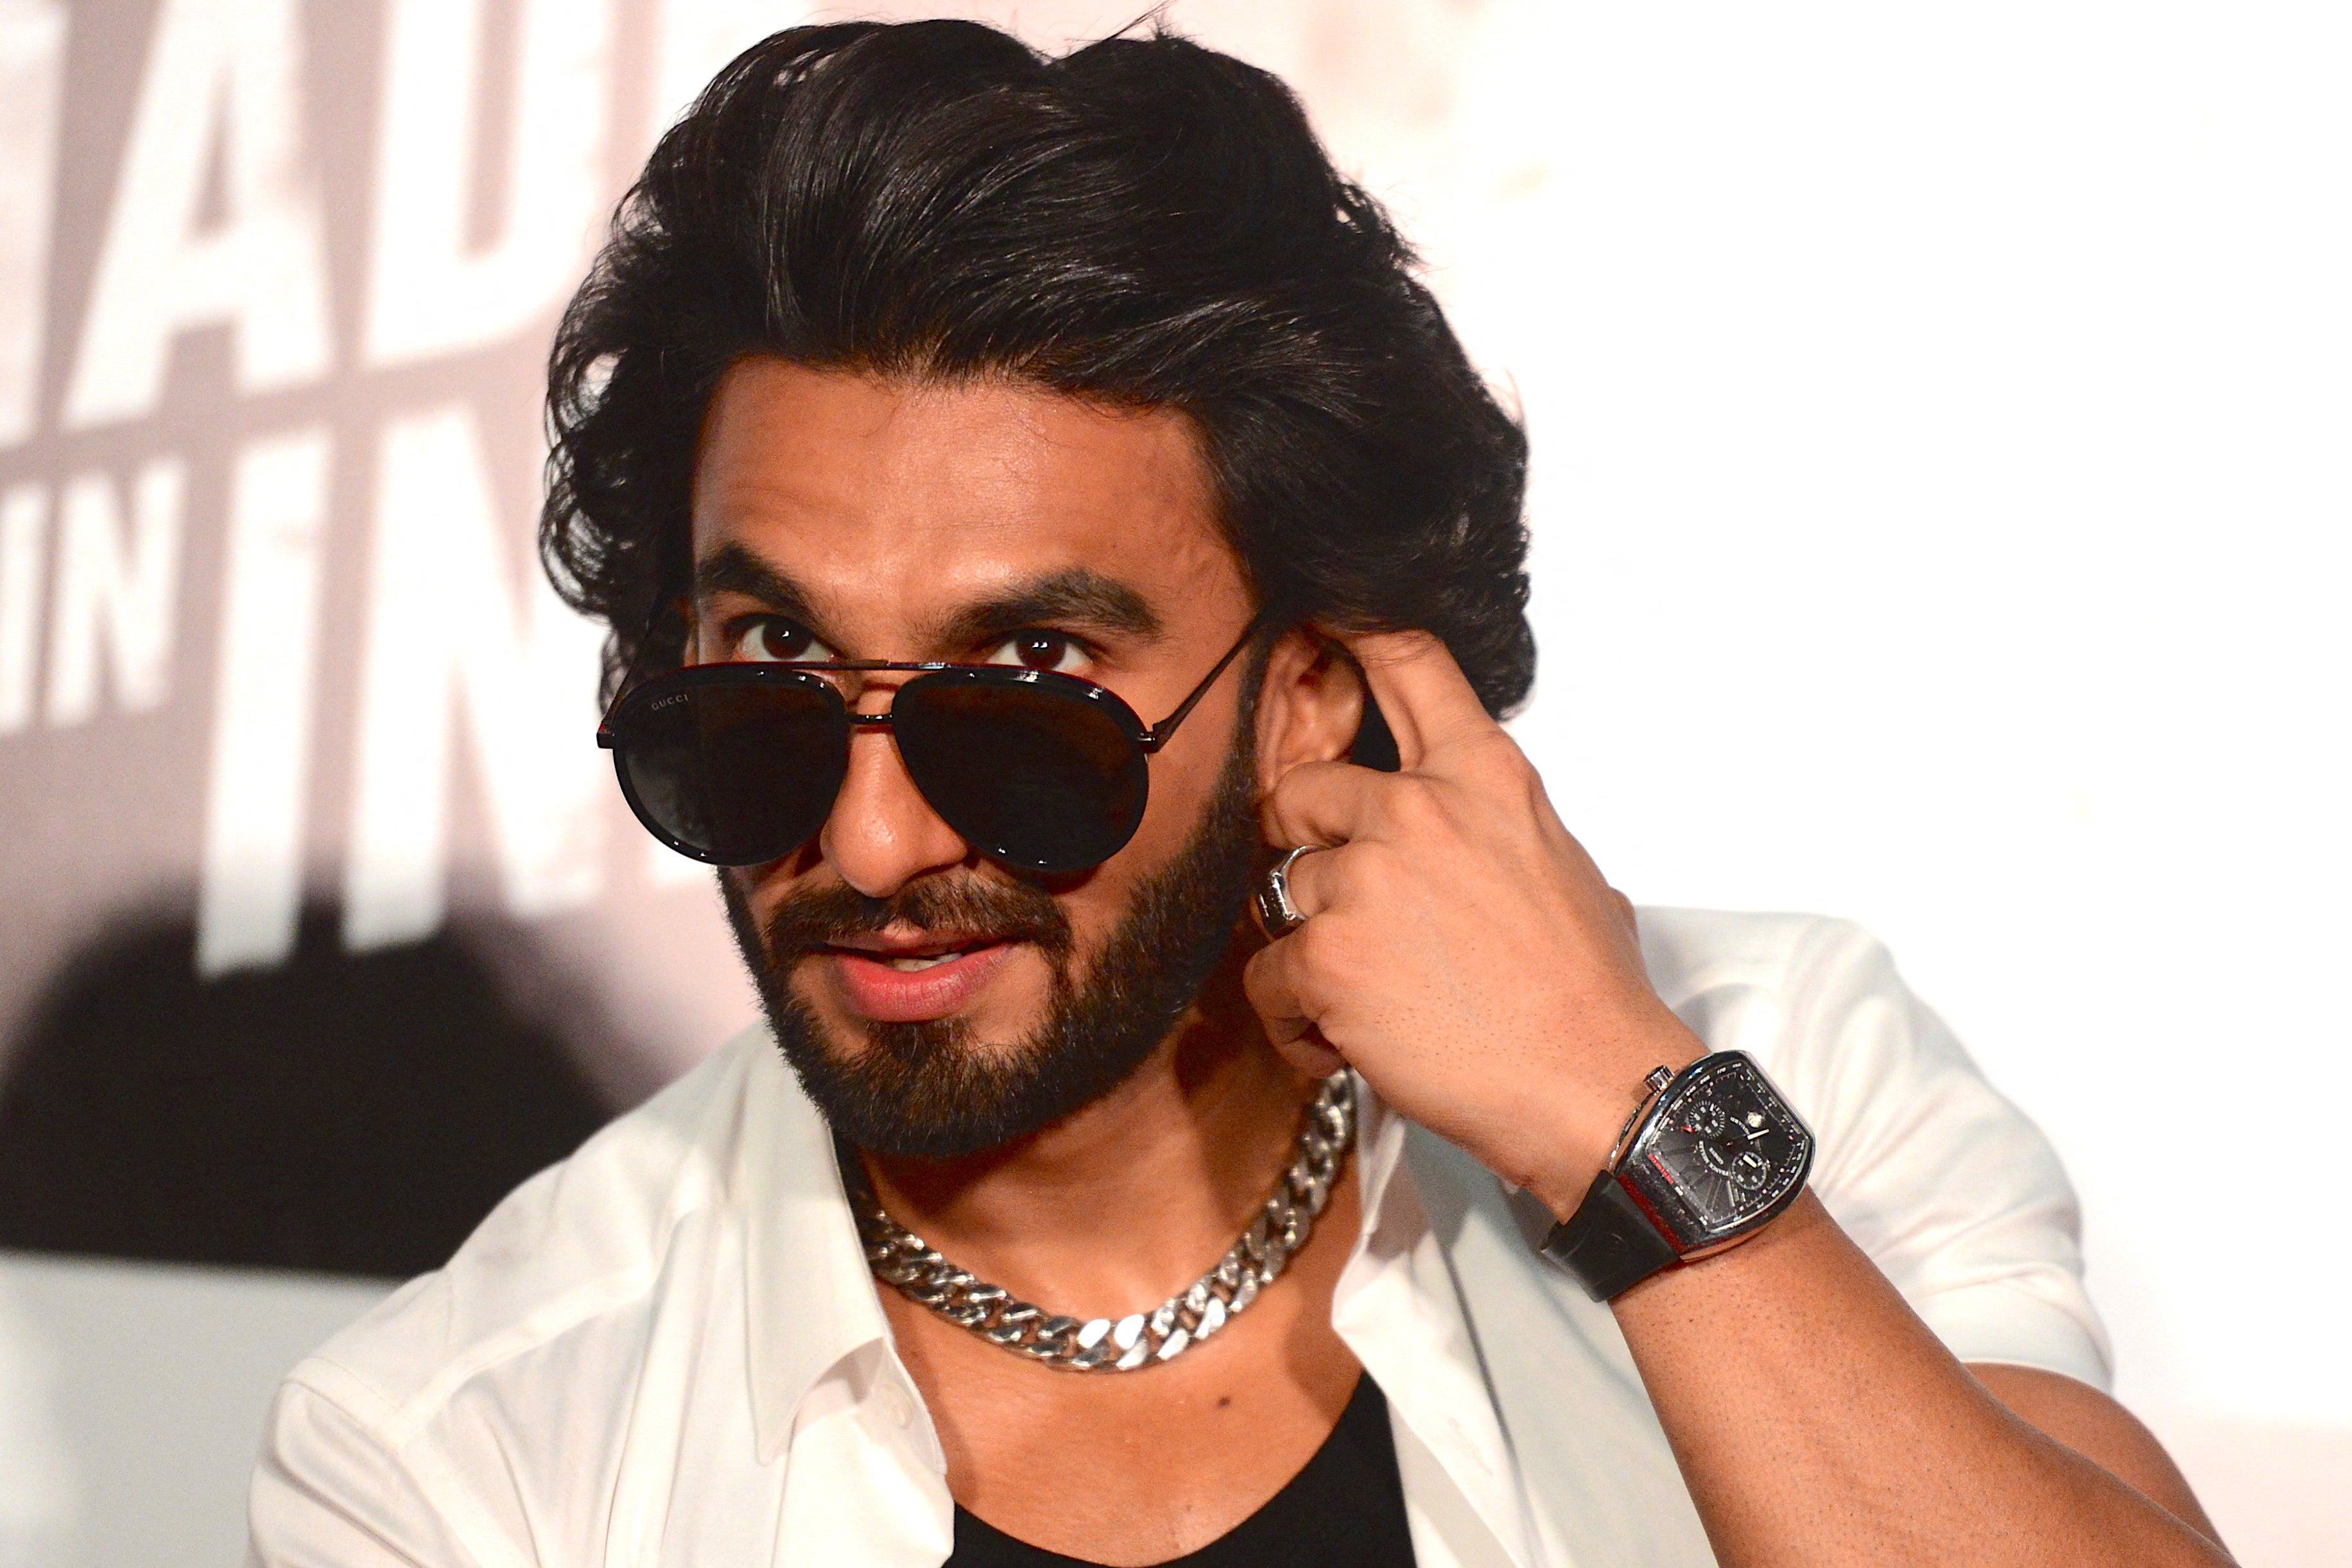 Bollywood actor Ranveer Singh poses for pictures during the launch event of the film ‘Made in India’ in Mumbai on 28 May 2022